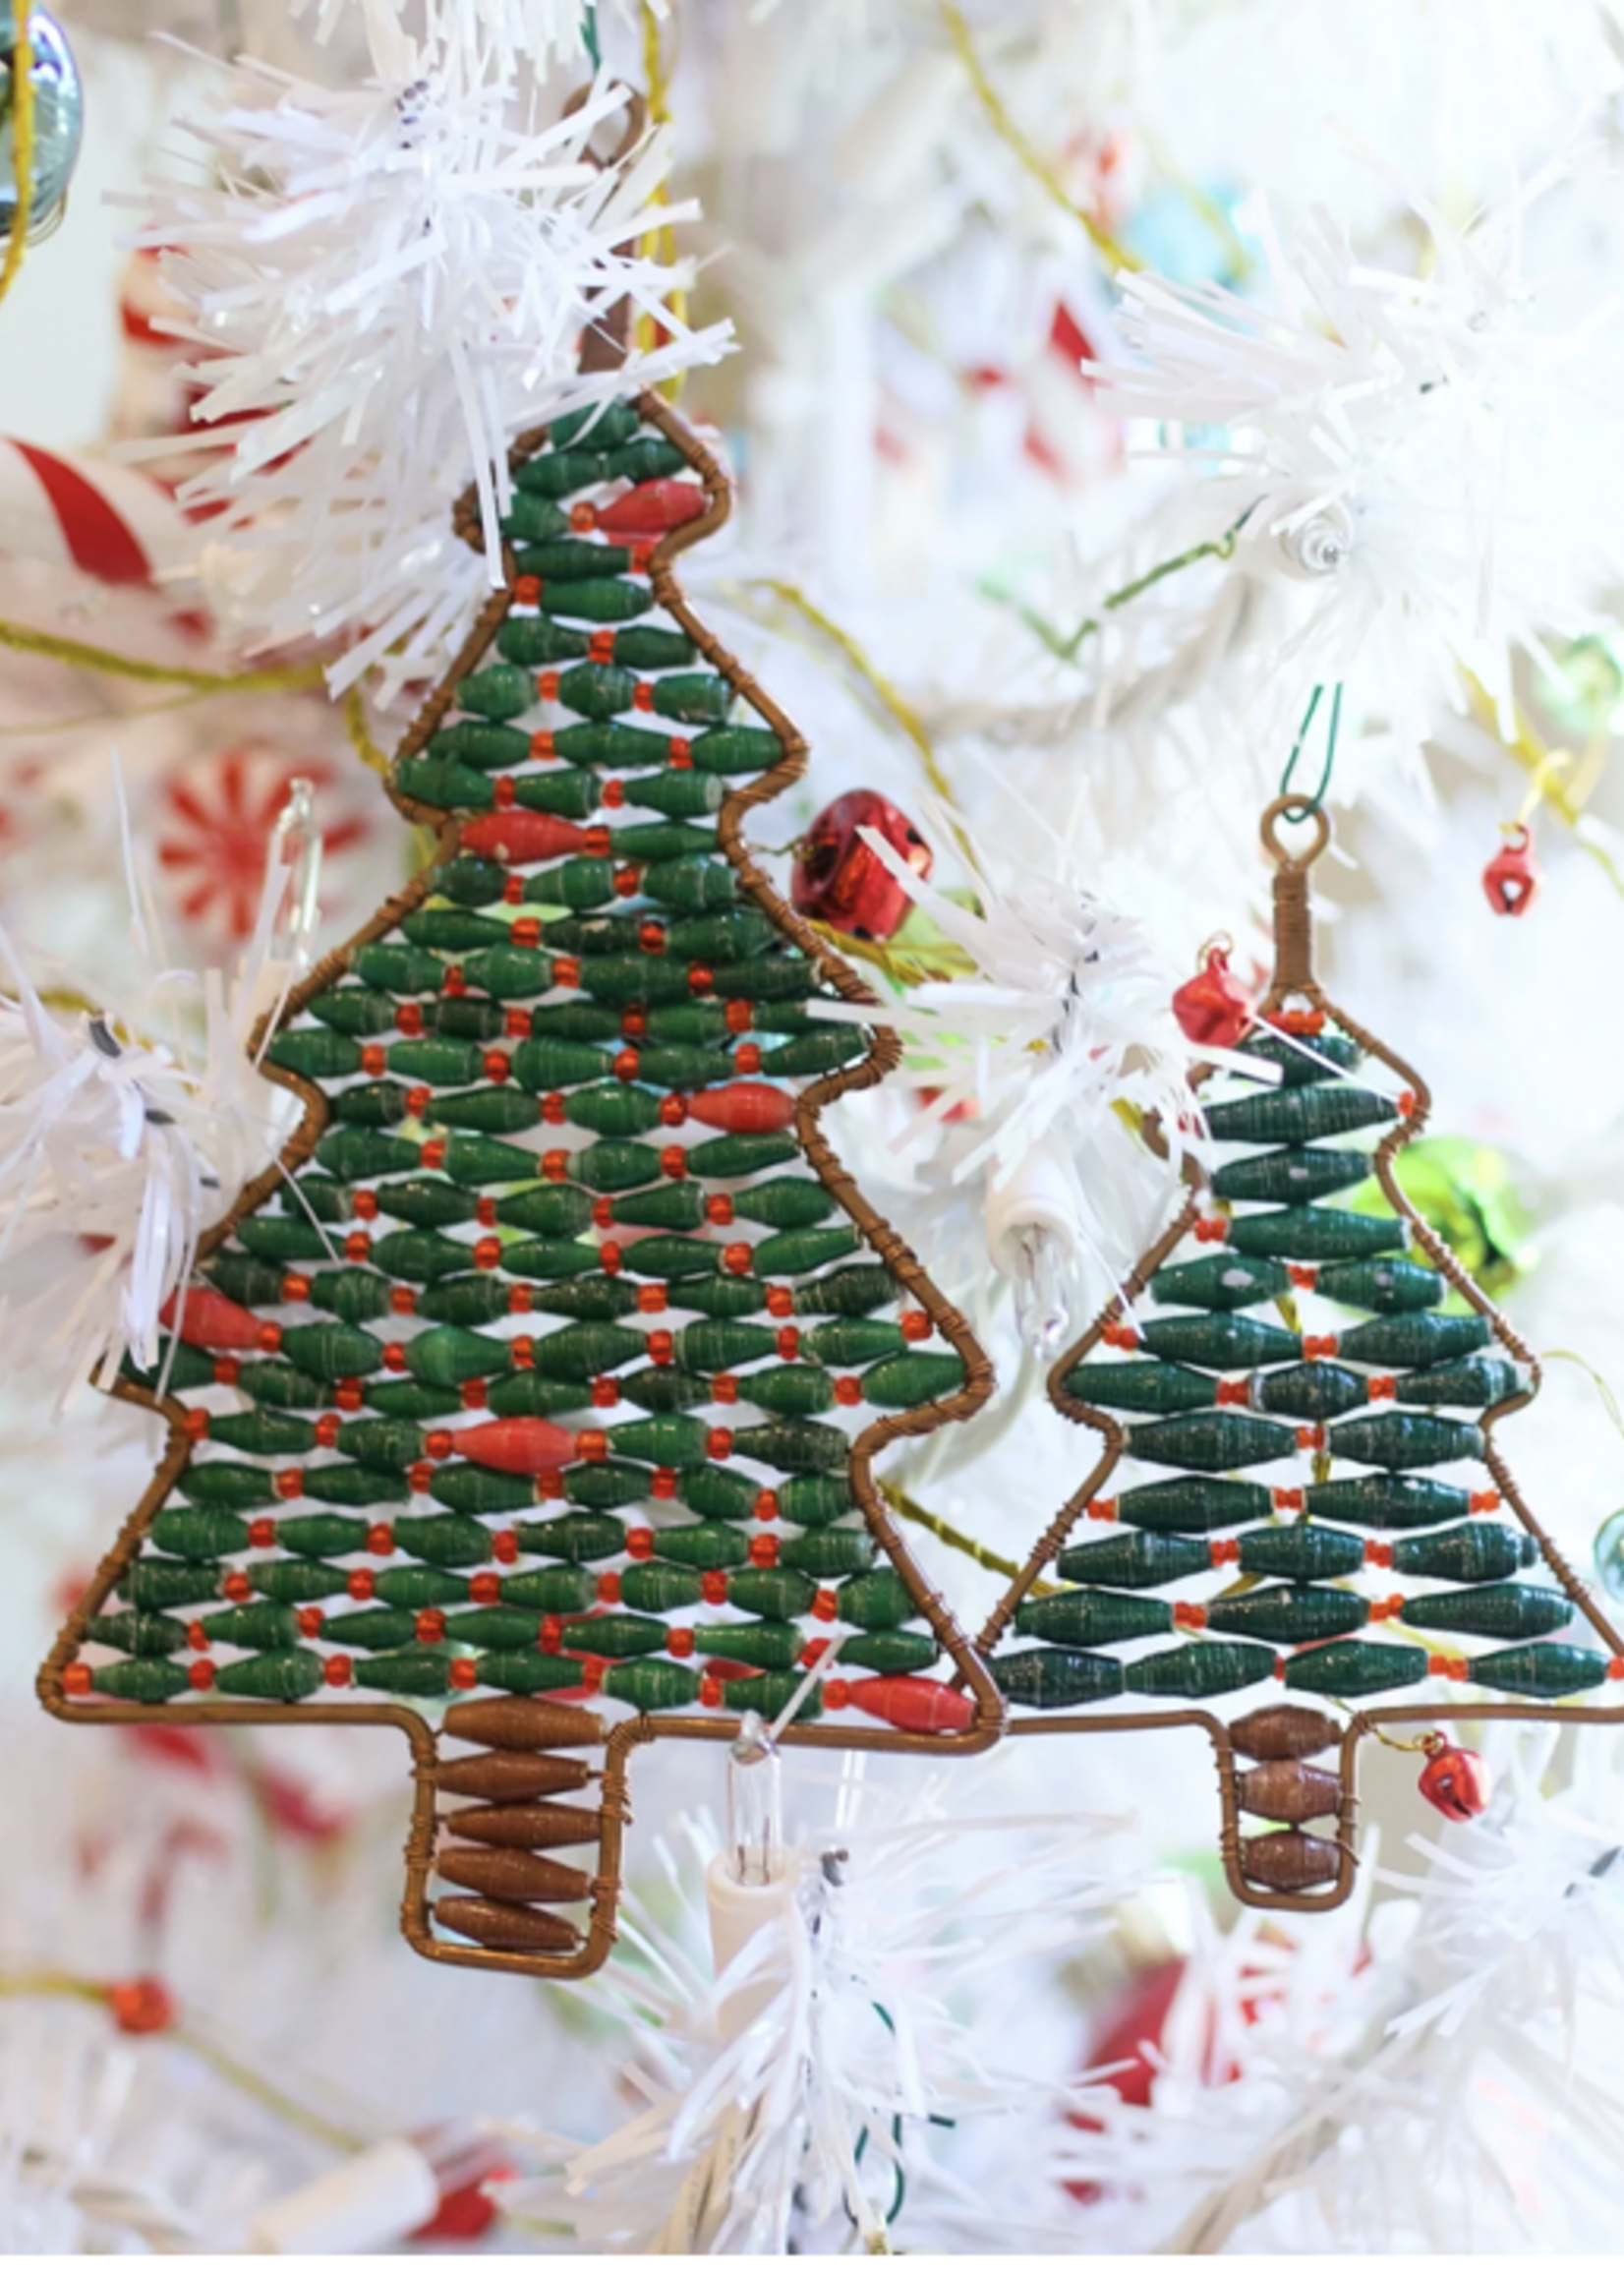 Christmas Tree Paper Bead Ornament - Large, Green